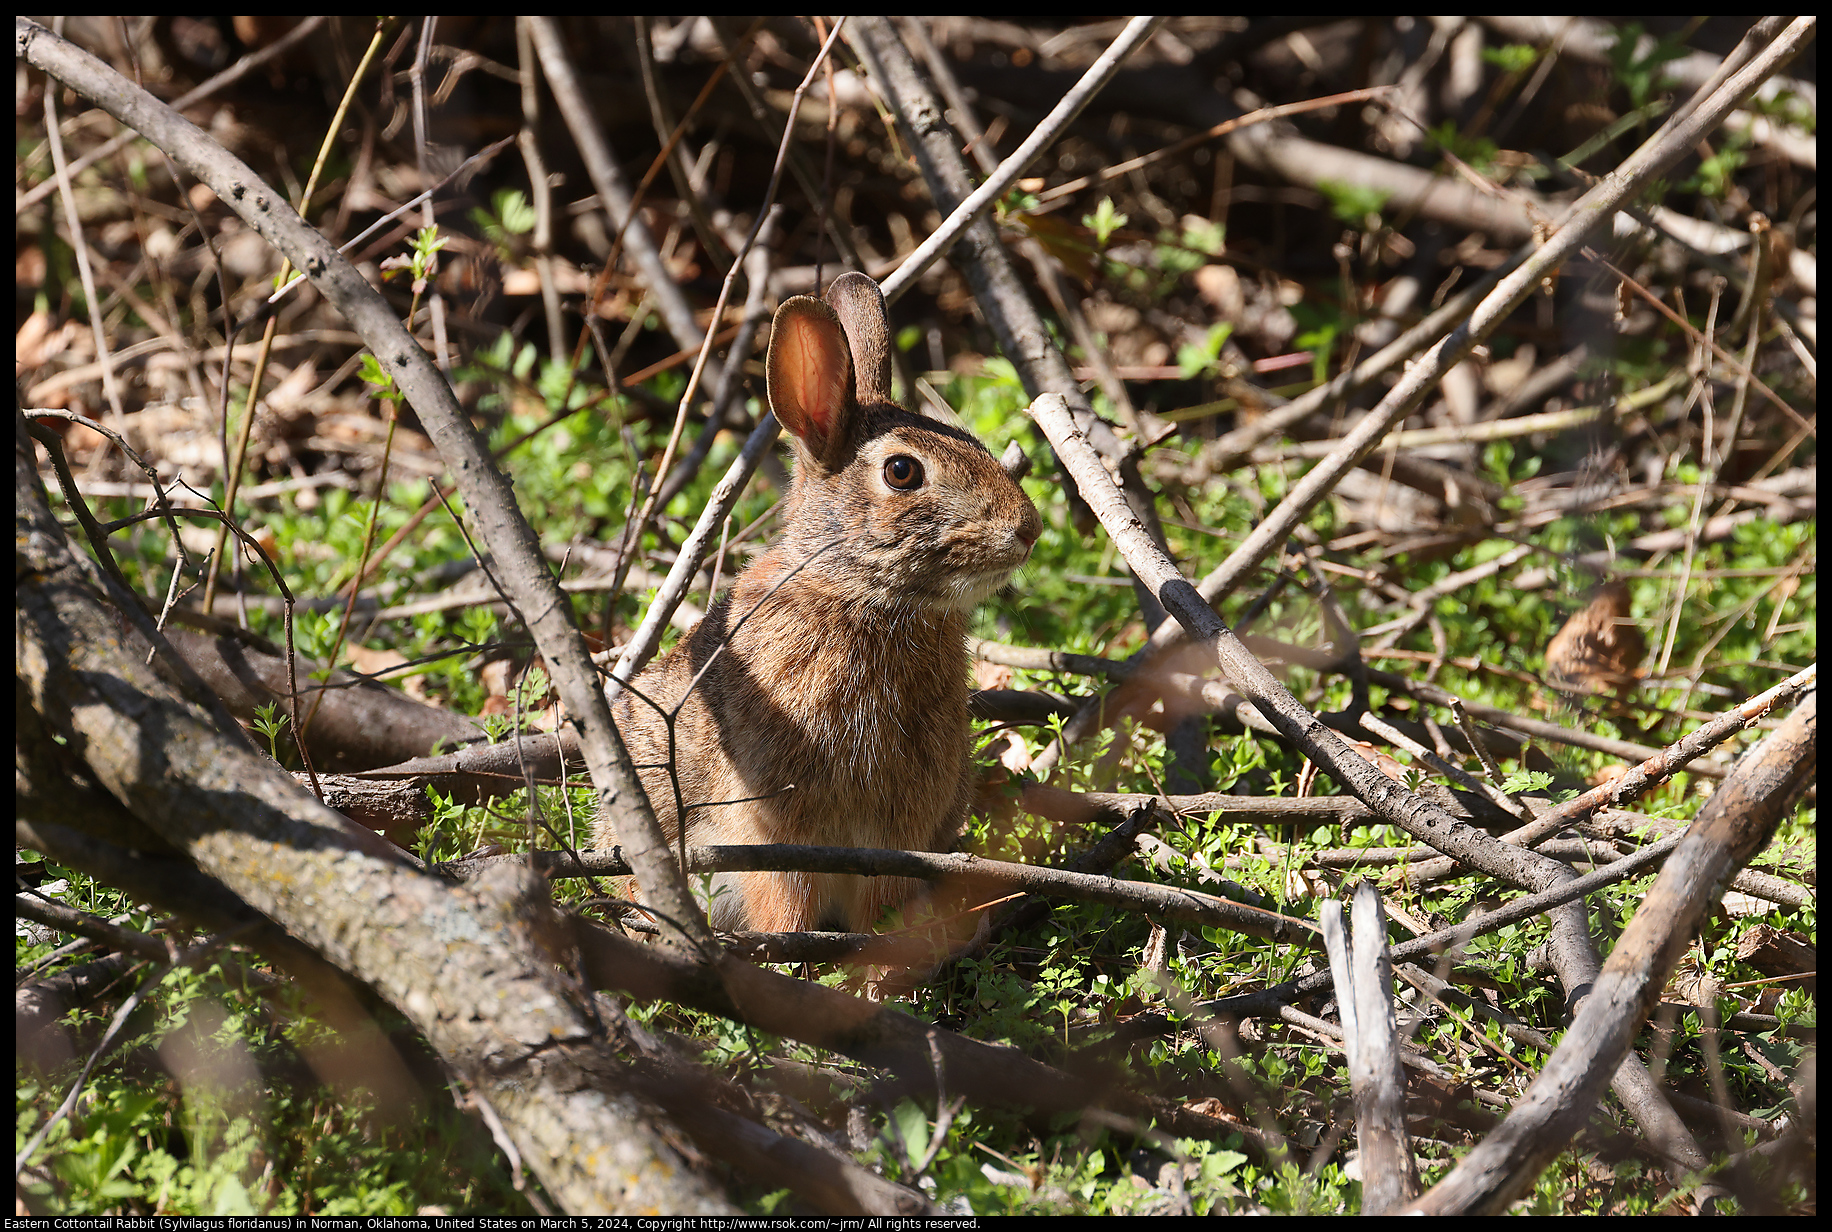 Eastern Cottontail Rabbit (Sylvilagus floridanus) in Norman, Oklahoma, United States on March 5, 2024